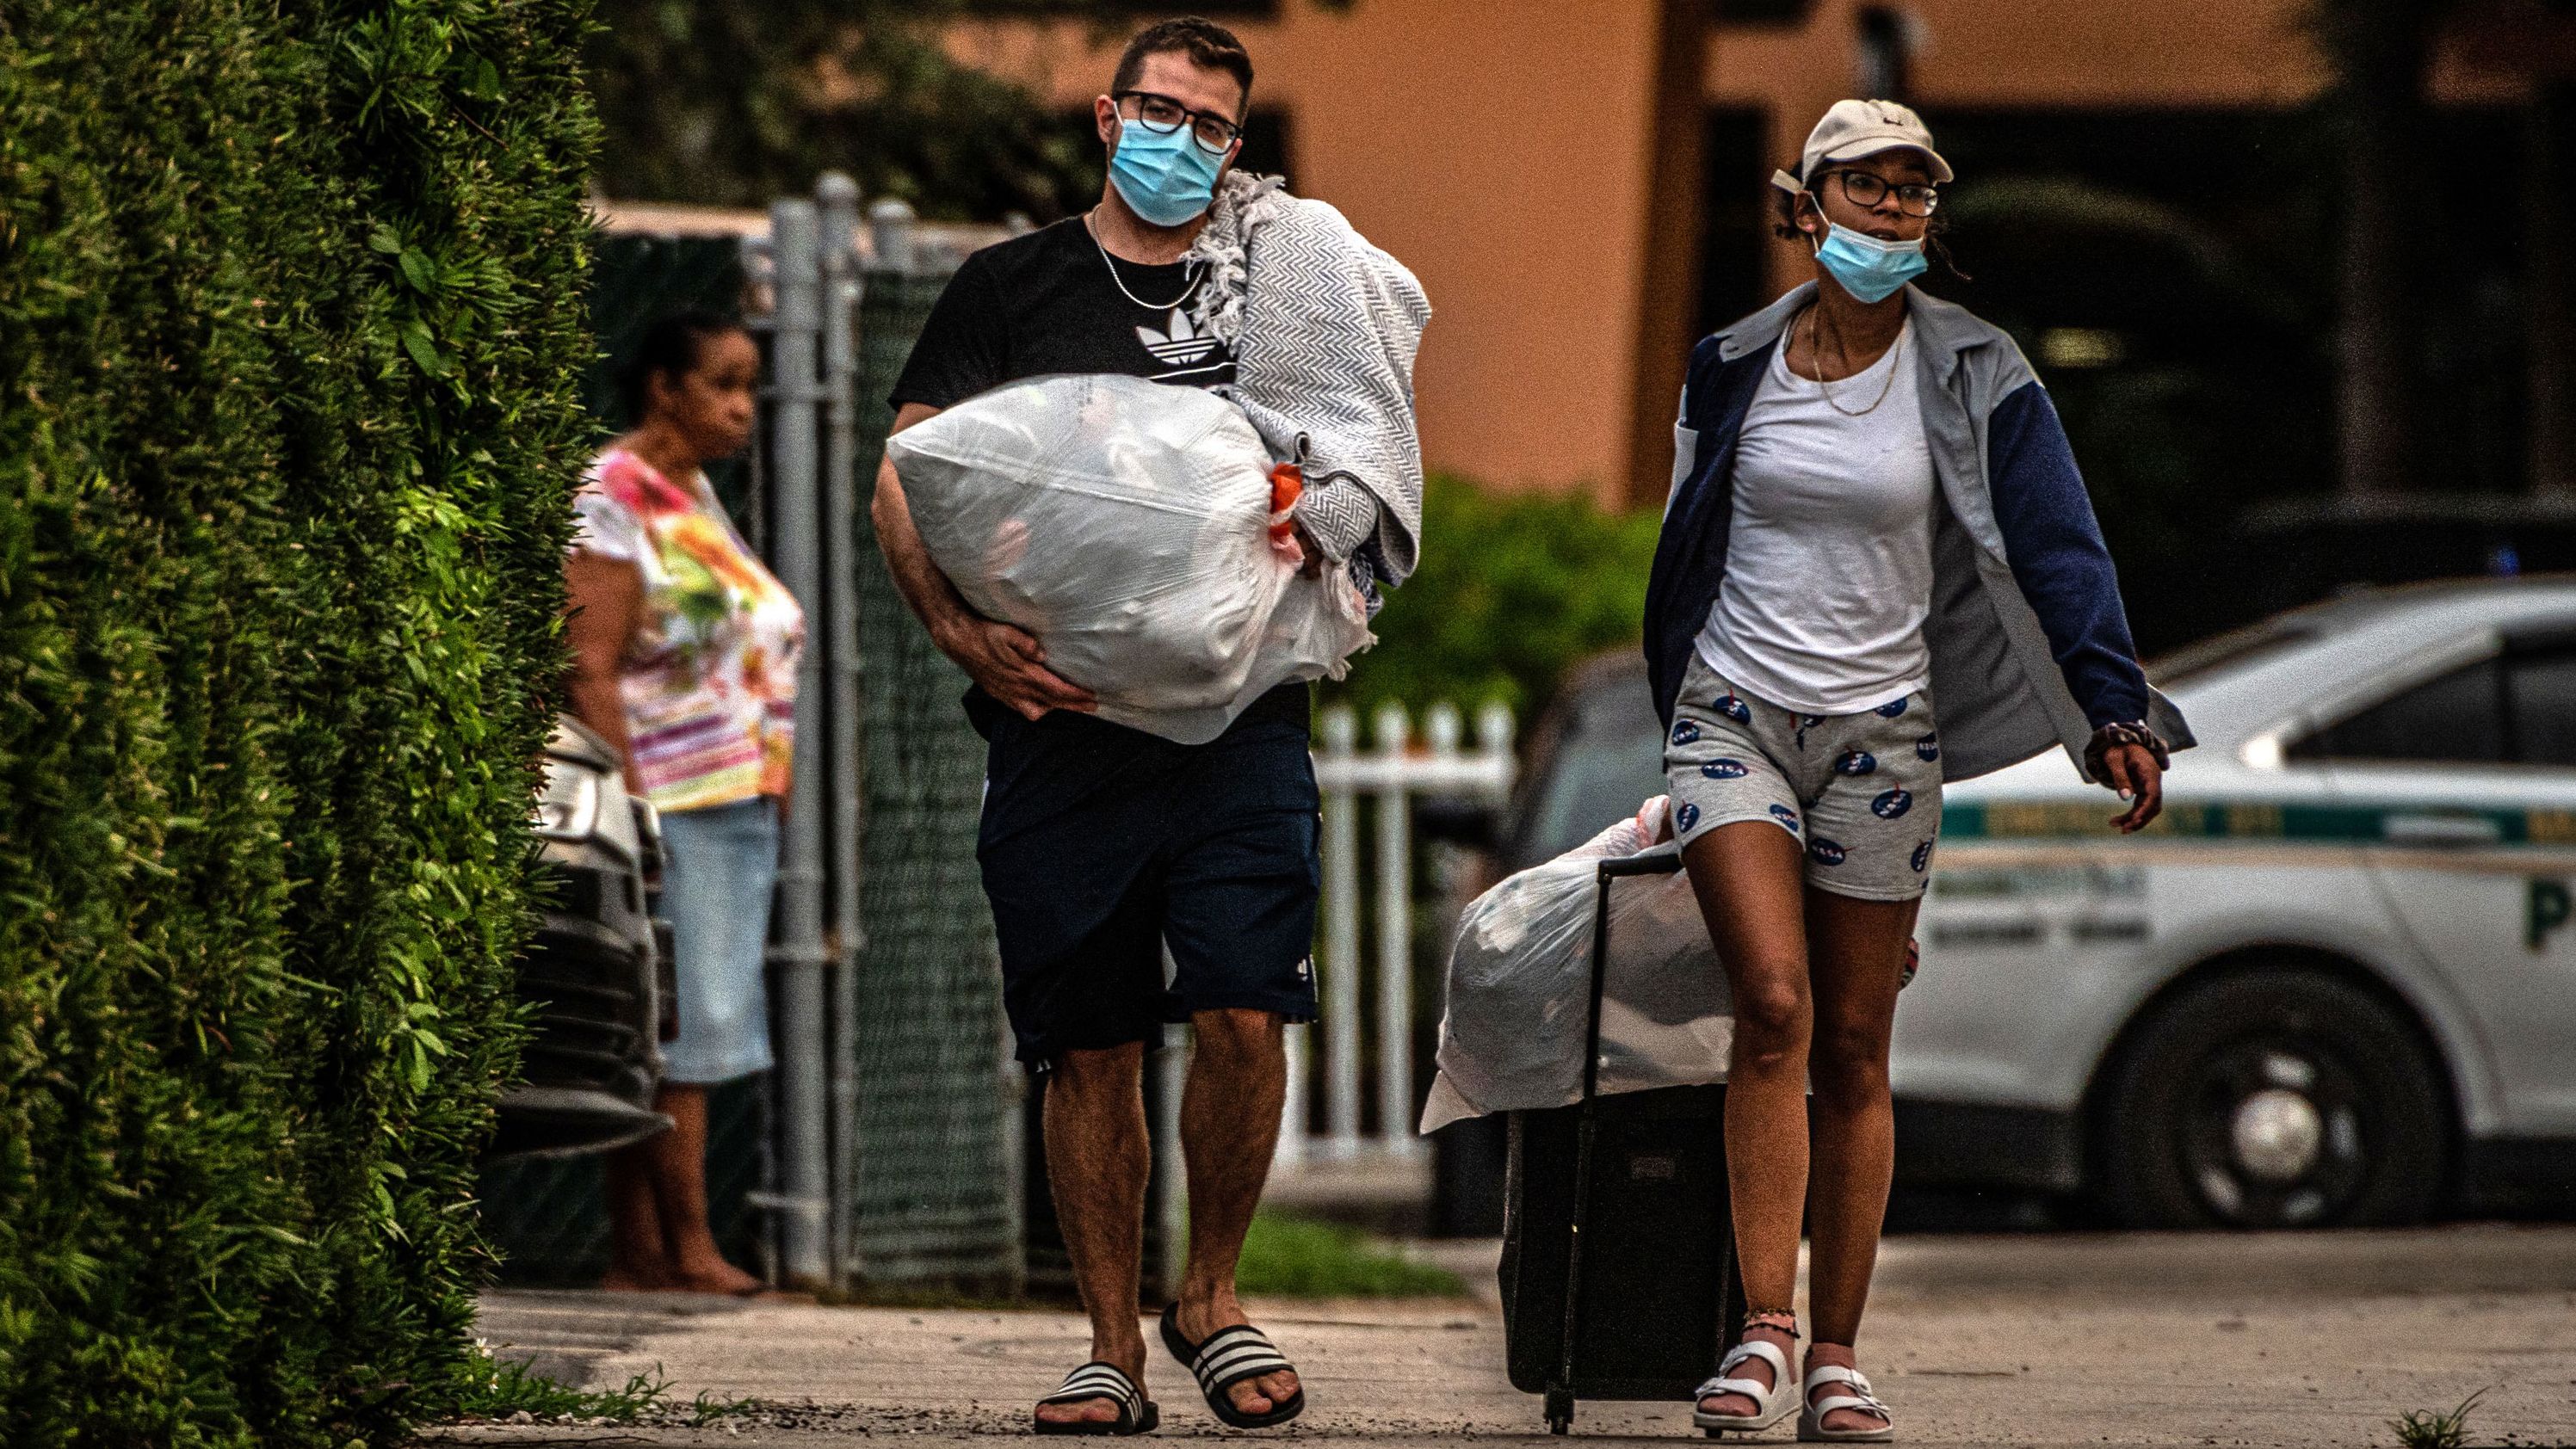 Residents of the Crestview Towers Condominium carry their belongings <a href="https://www.cnn.com/2021/07/02/us/north-miami-crestview-condo-building-ordered-closed/index.html" target="_blank">as they leave their building </a>in North Miami Beach, Florida, on July 2. The building, about 6 miles from Surfside, was deemed to be structurally and electrically unsafe based on a delinquent recertification report for the almost 50-year-old building. The city said the move was out of an "abundance of caution," as area authorities check high-rise condo buildings following the Surfside collapse.